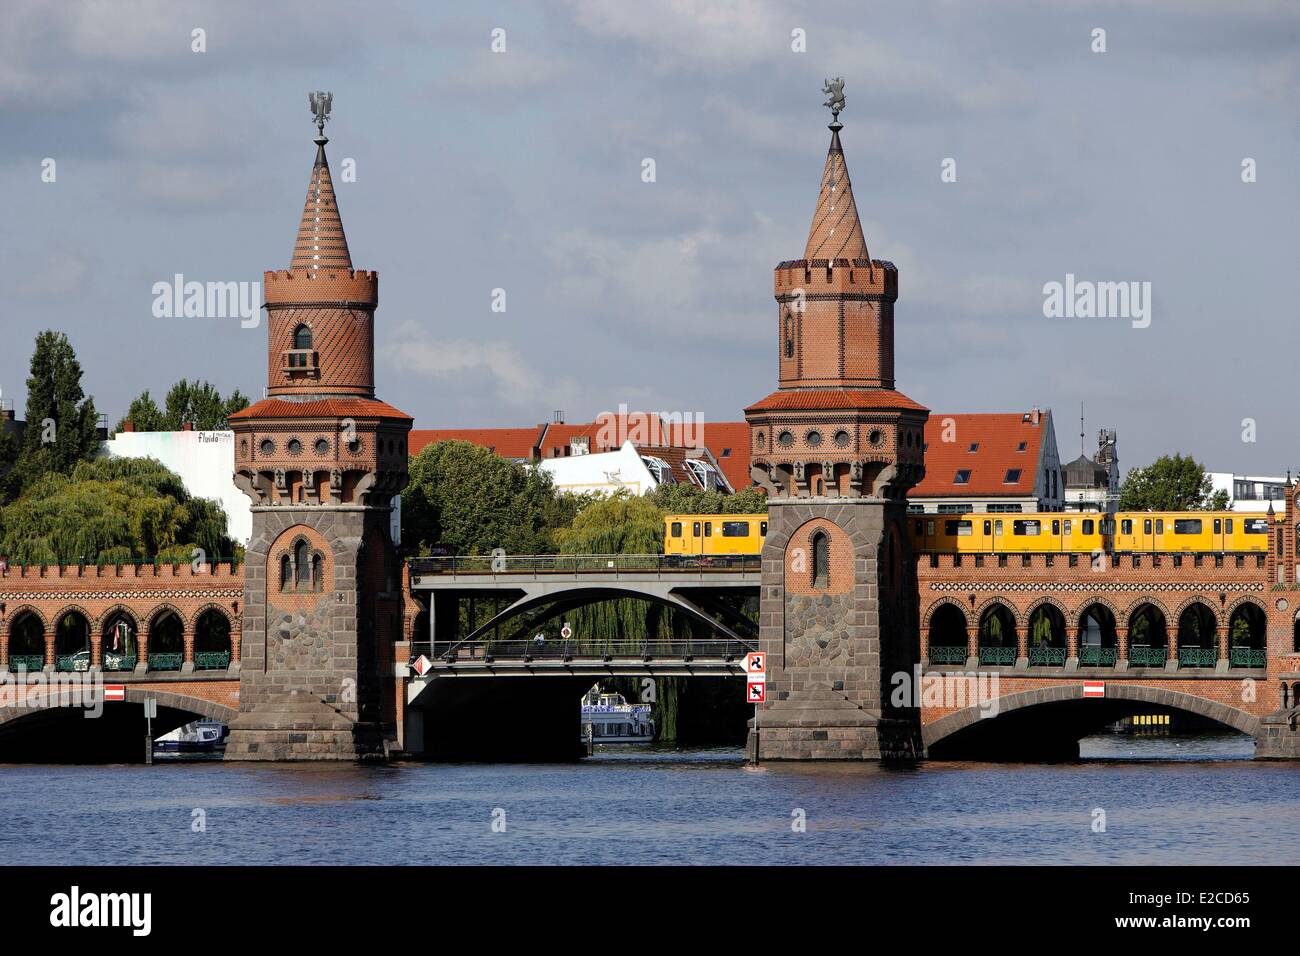 Germany, Berlin, districts of Kreuzberg and Friedrichshain, the Oberbaumbrücke, east of the city, was built in the late nineteenth century in a Gothic Revival style with red brick, it is the longest and most famous bridge in Berlin Stock Photo